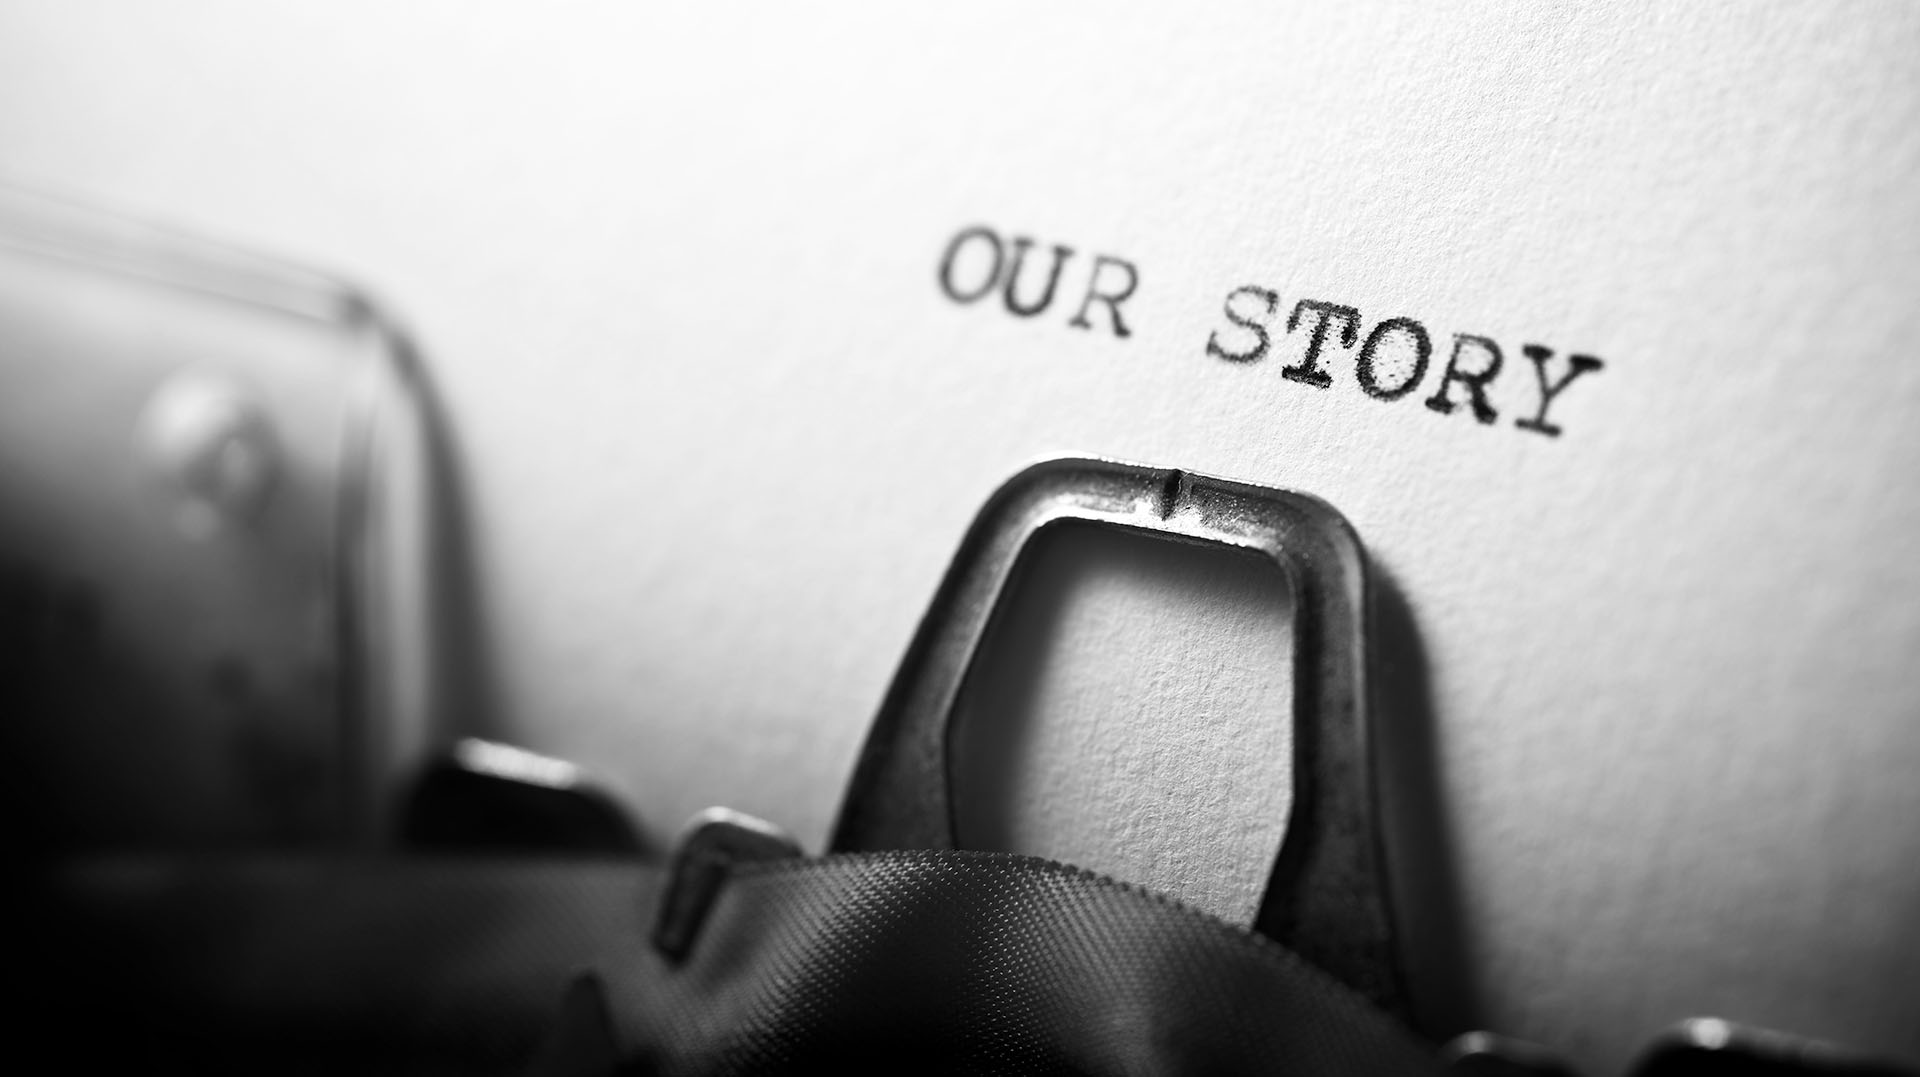 Image showing a typewriter with "Our story" being typed